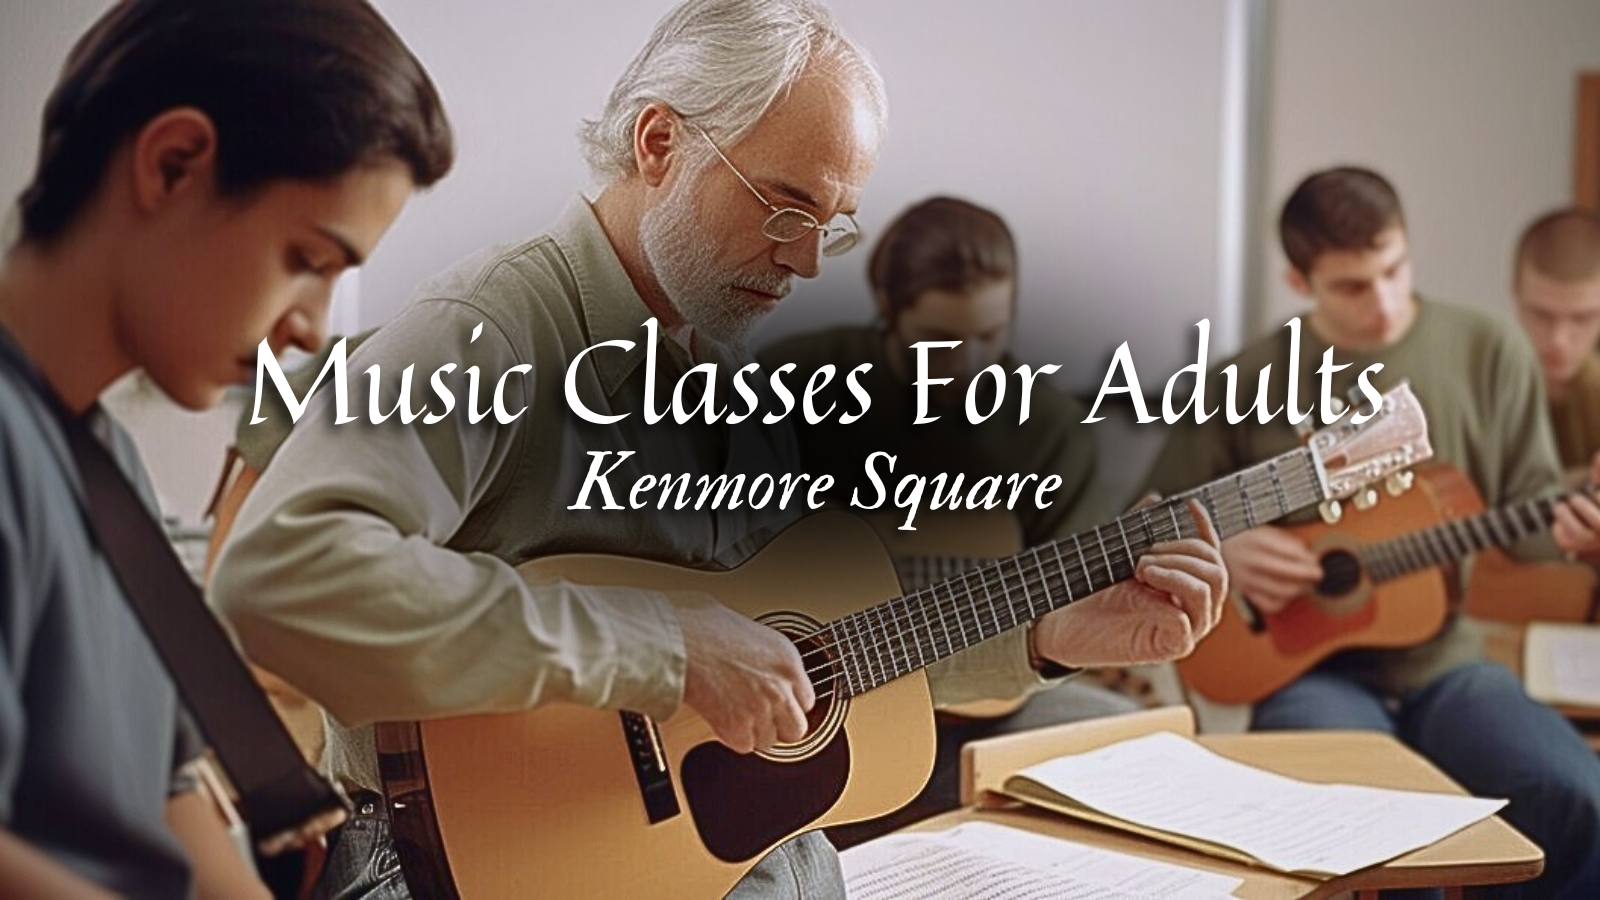 Music Classes for Adults in Kenmore Square, Massachusetts